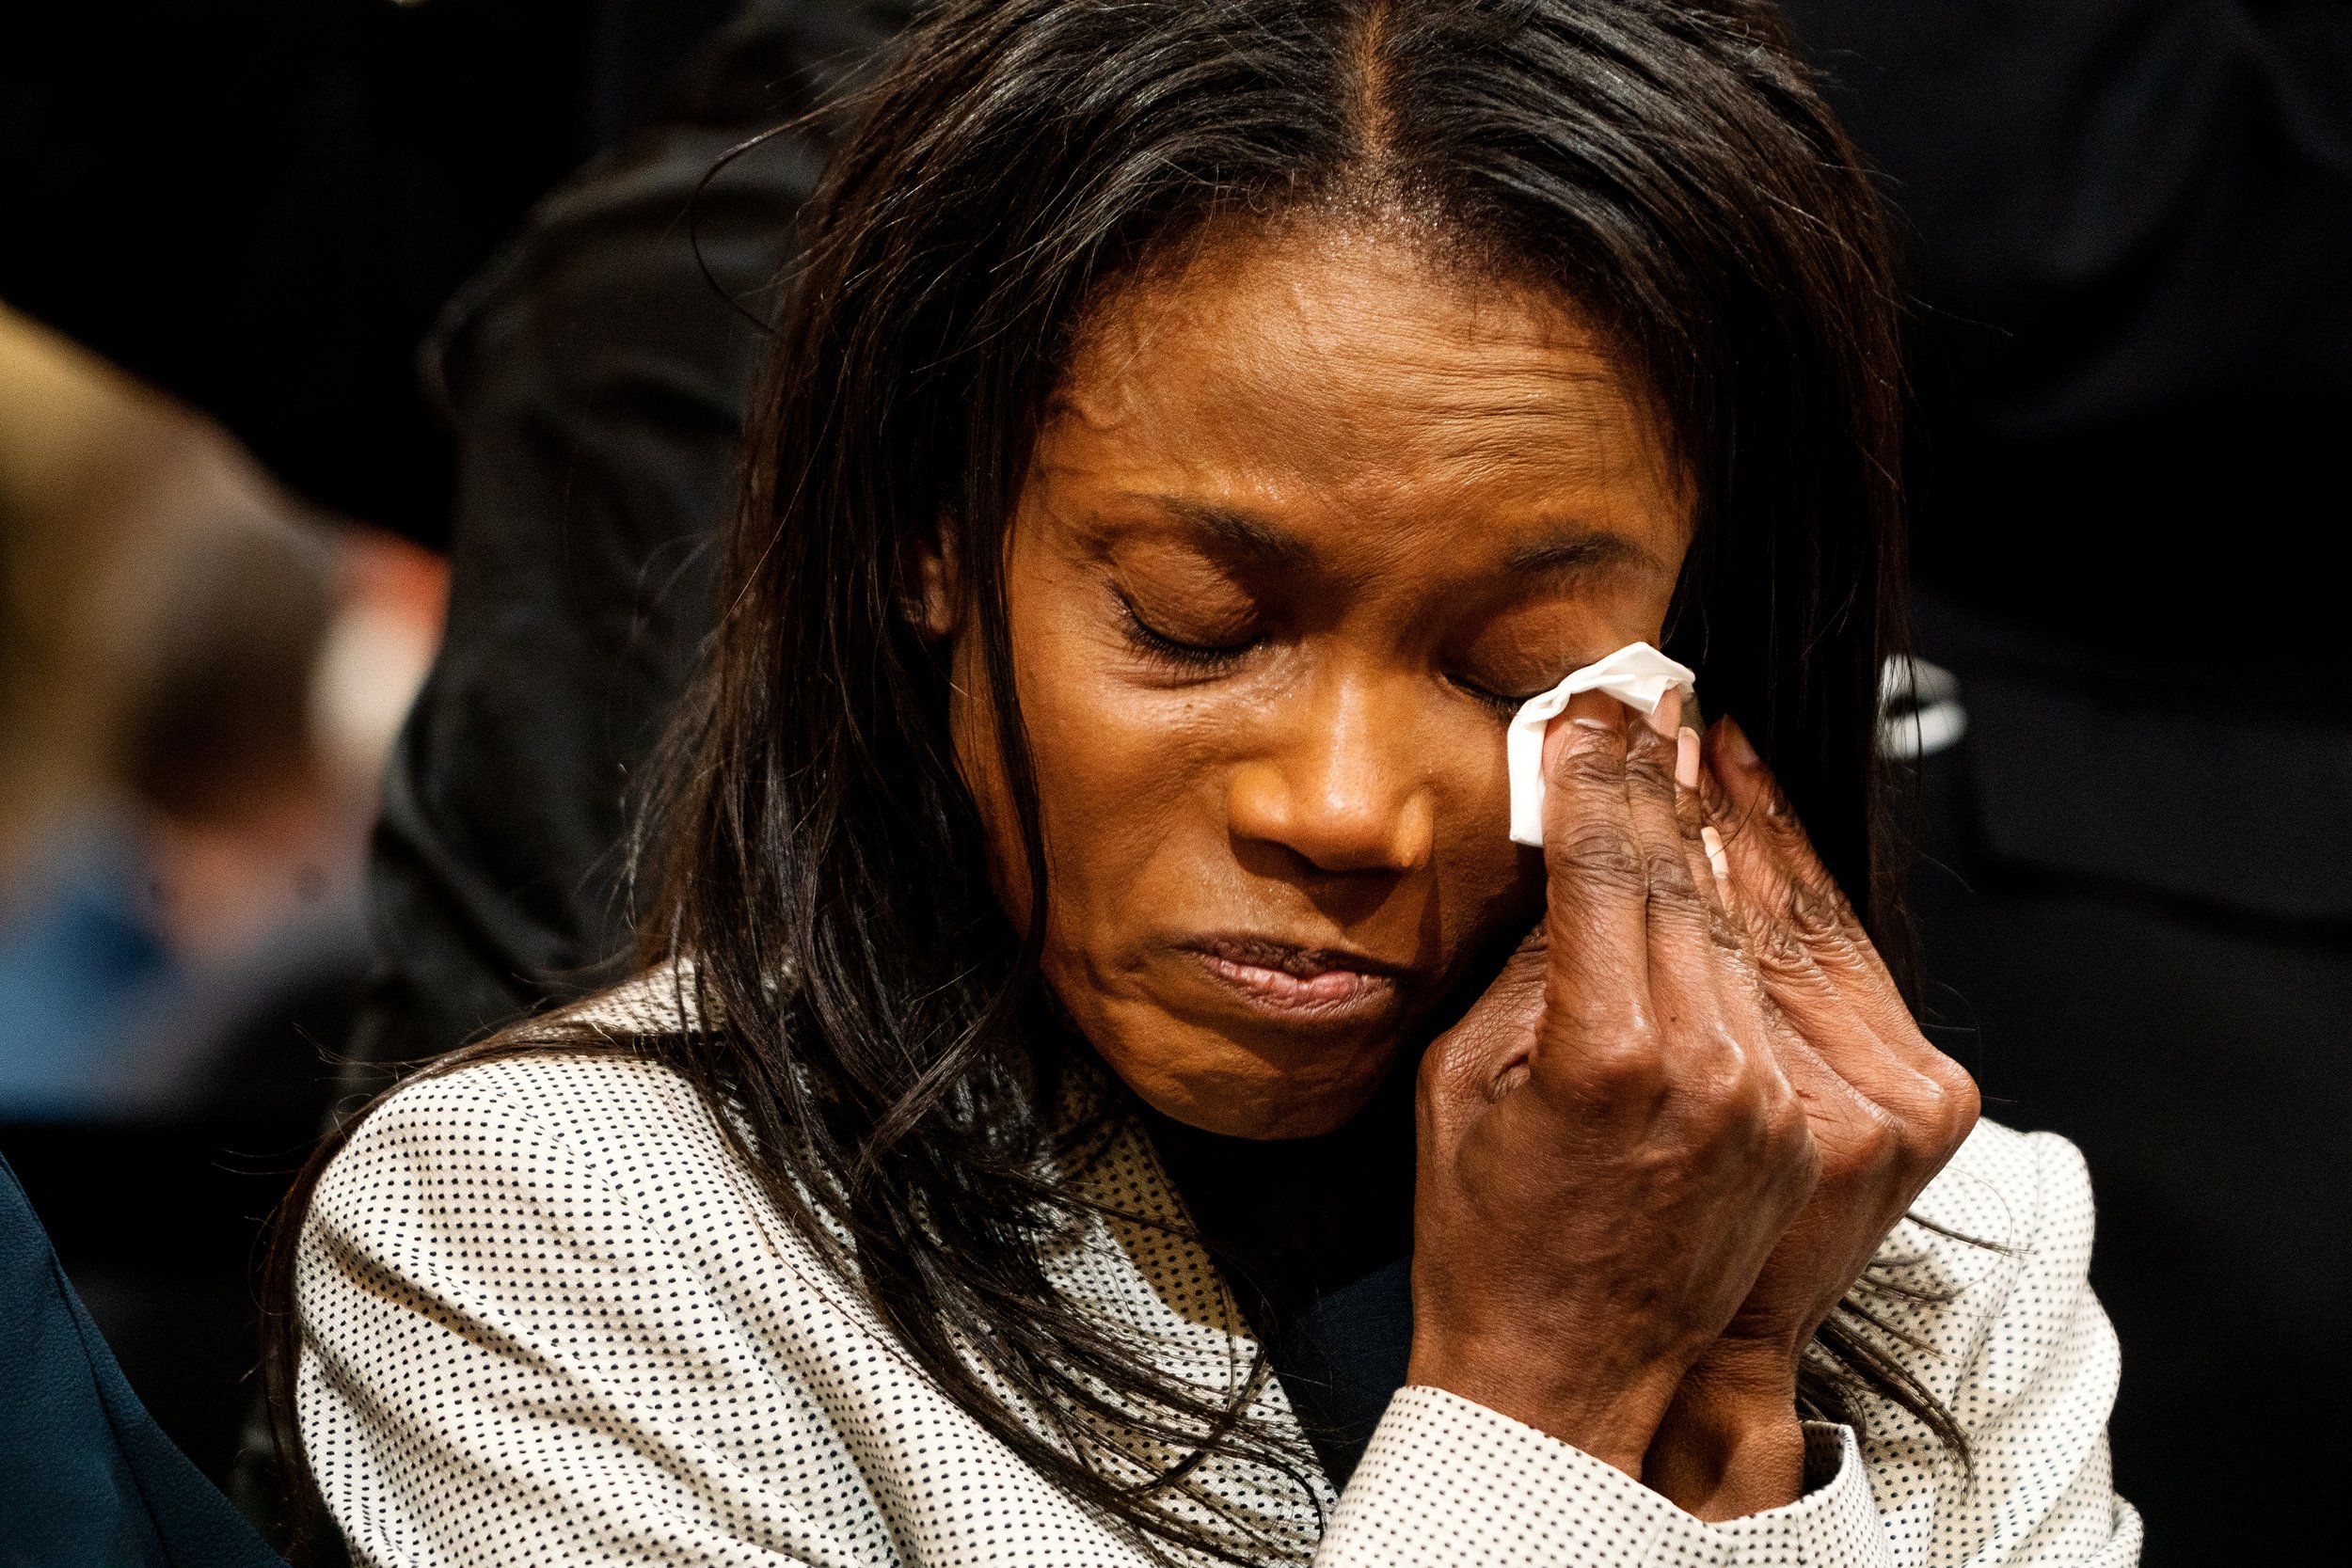  Serena Liebengood, widow of Capitol Police officer Howie Liebengood, cries during the showing of video of the Jan. 6 attack on the US Capitol during the hearing of the House select committee investigating the Jan. 6 attack on the U.S. Capitol. 